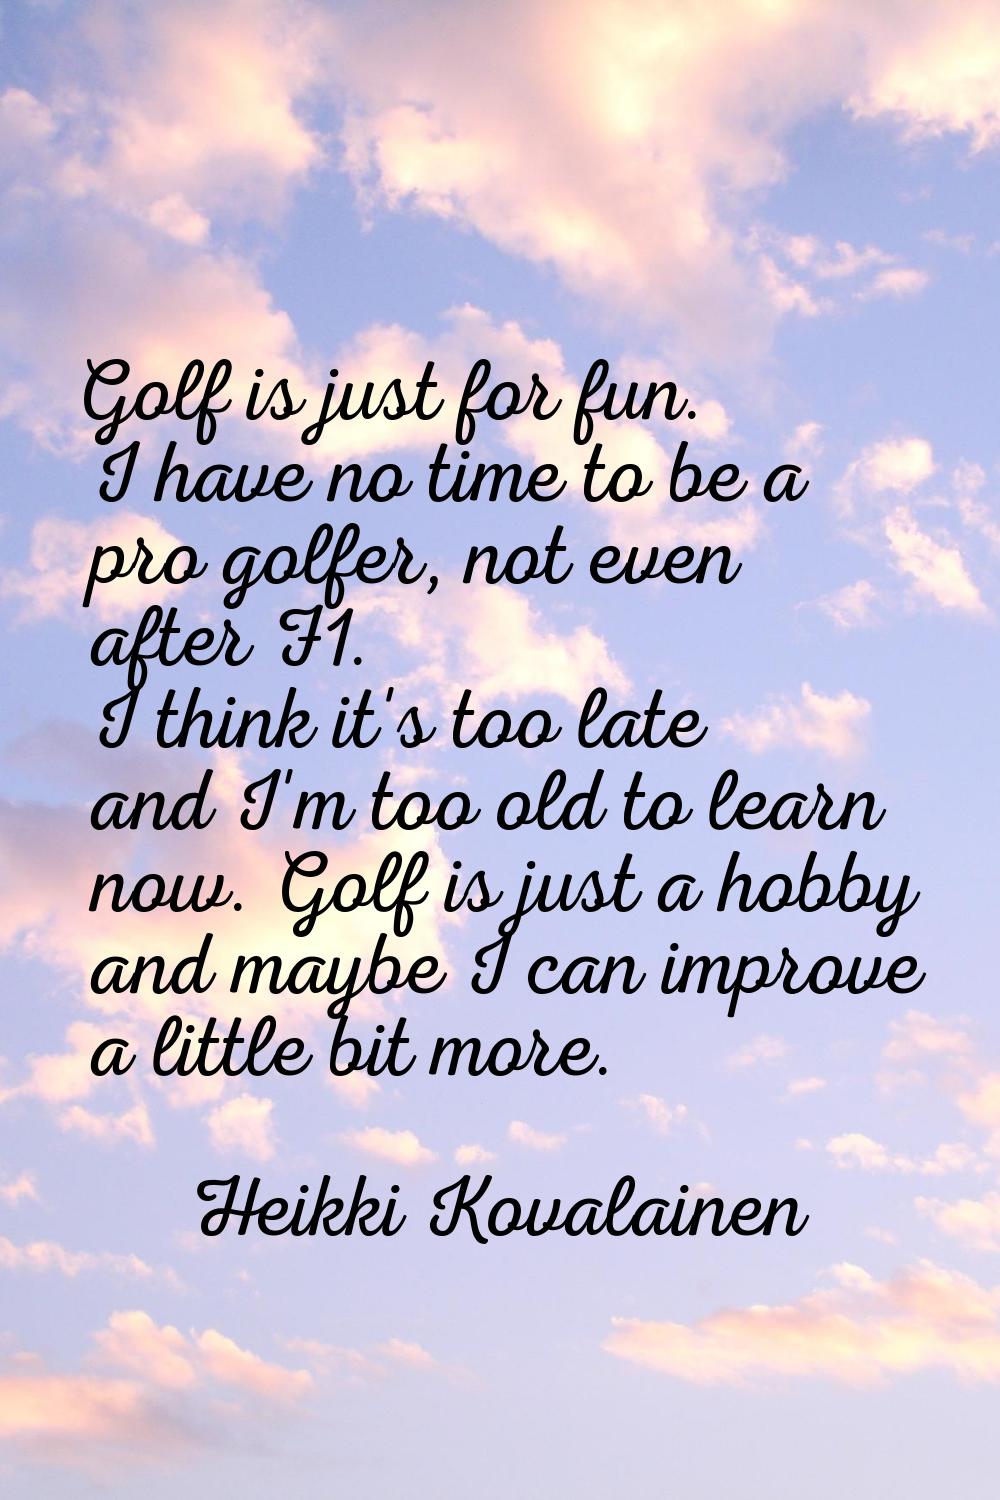 Golf is just for fun. I have no time to be a pro golfer, not even after F1. I think it's too late a